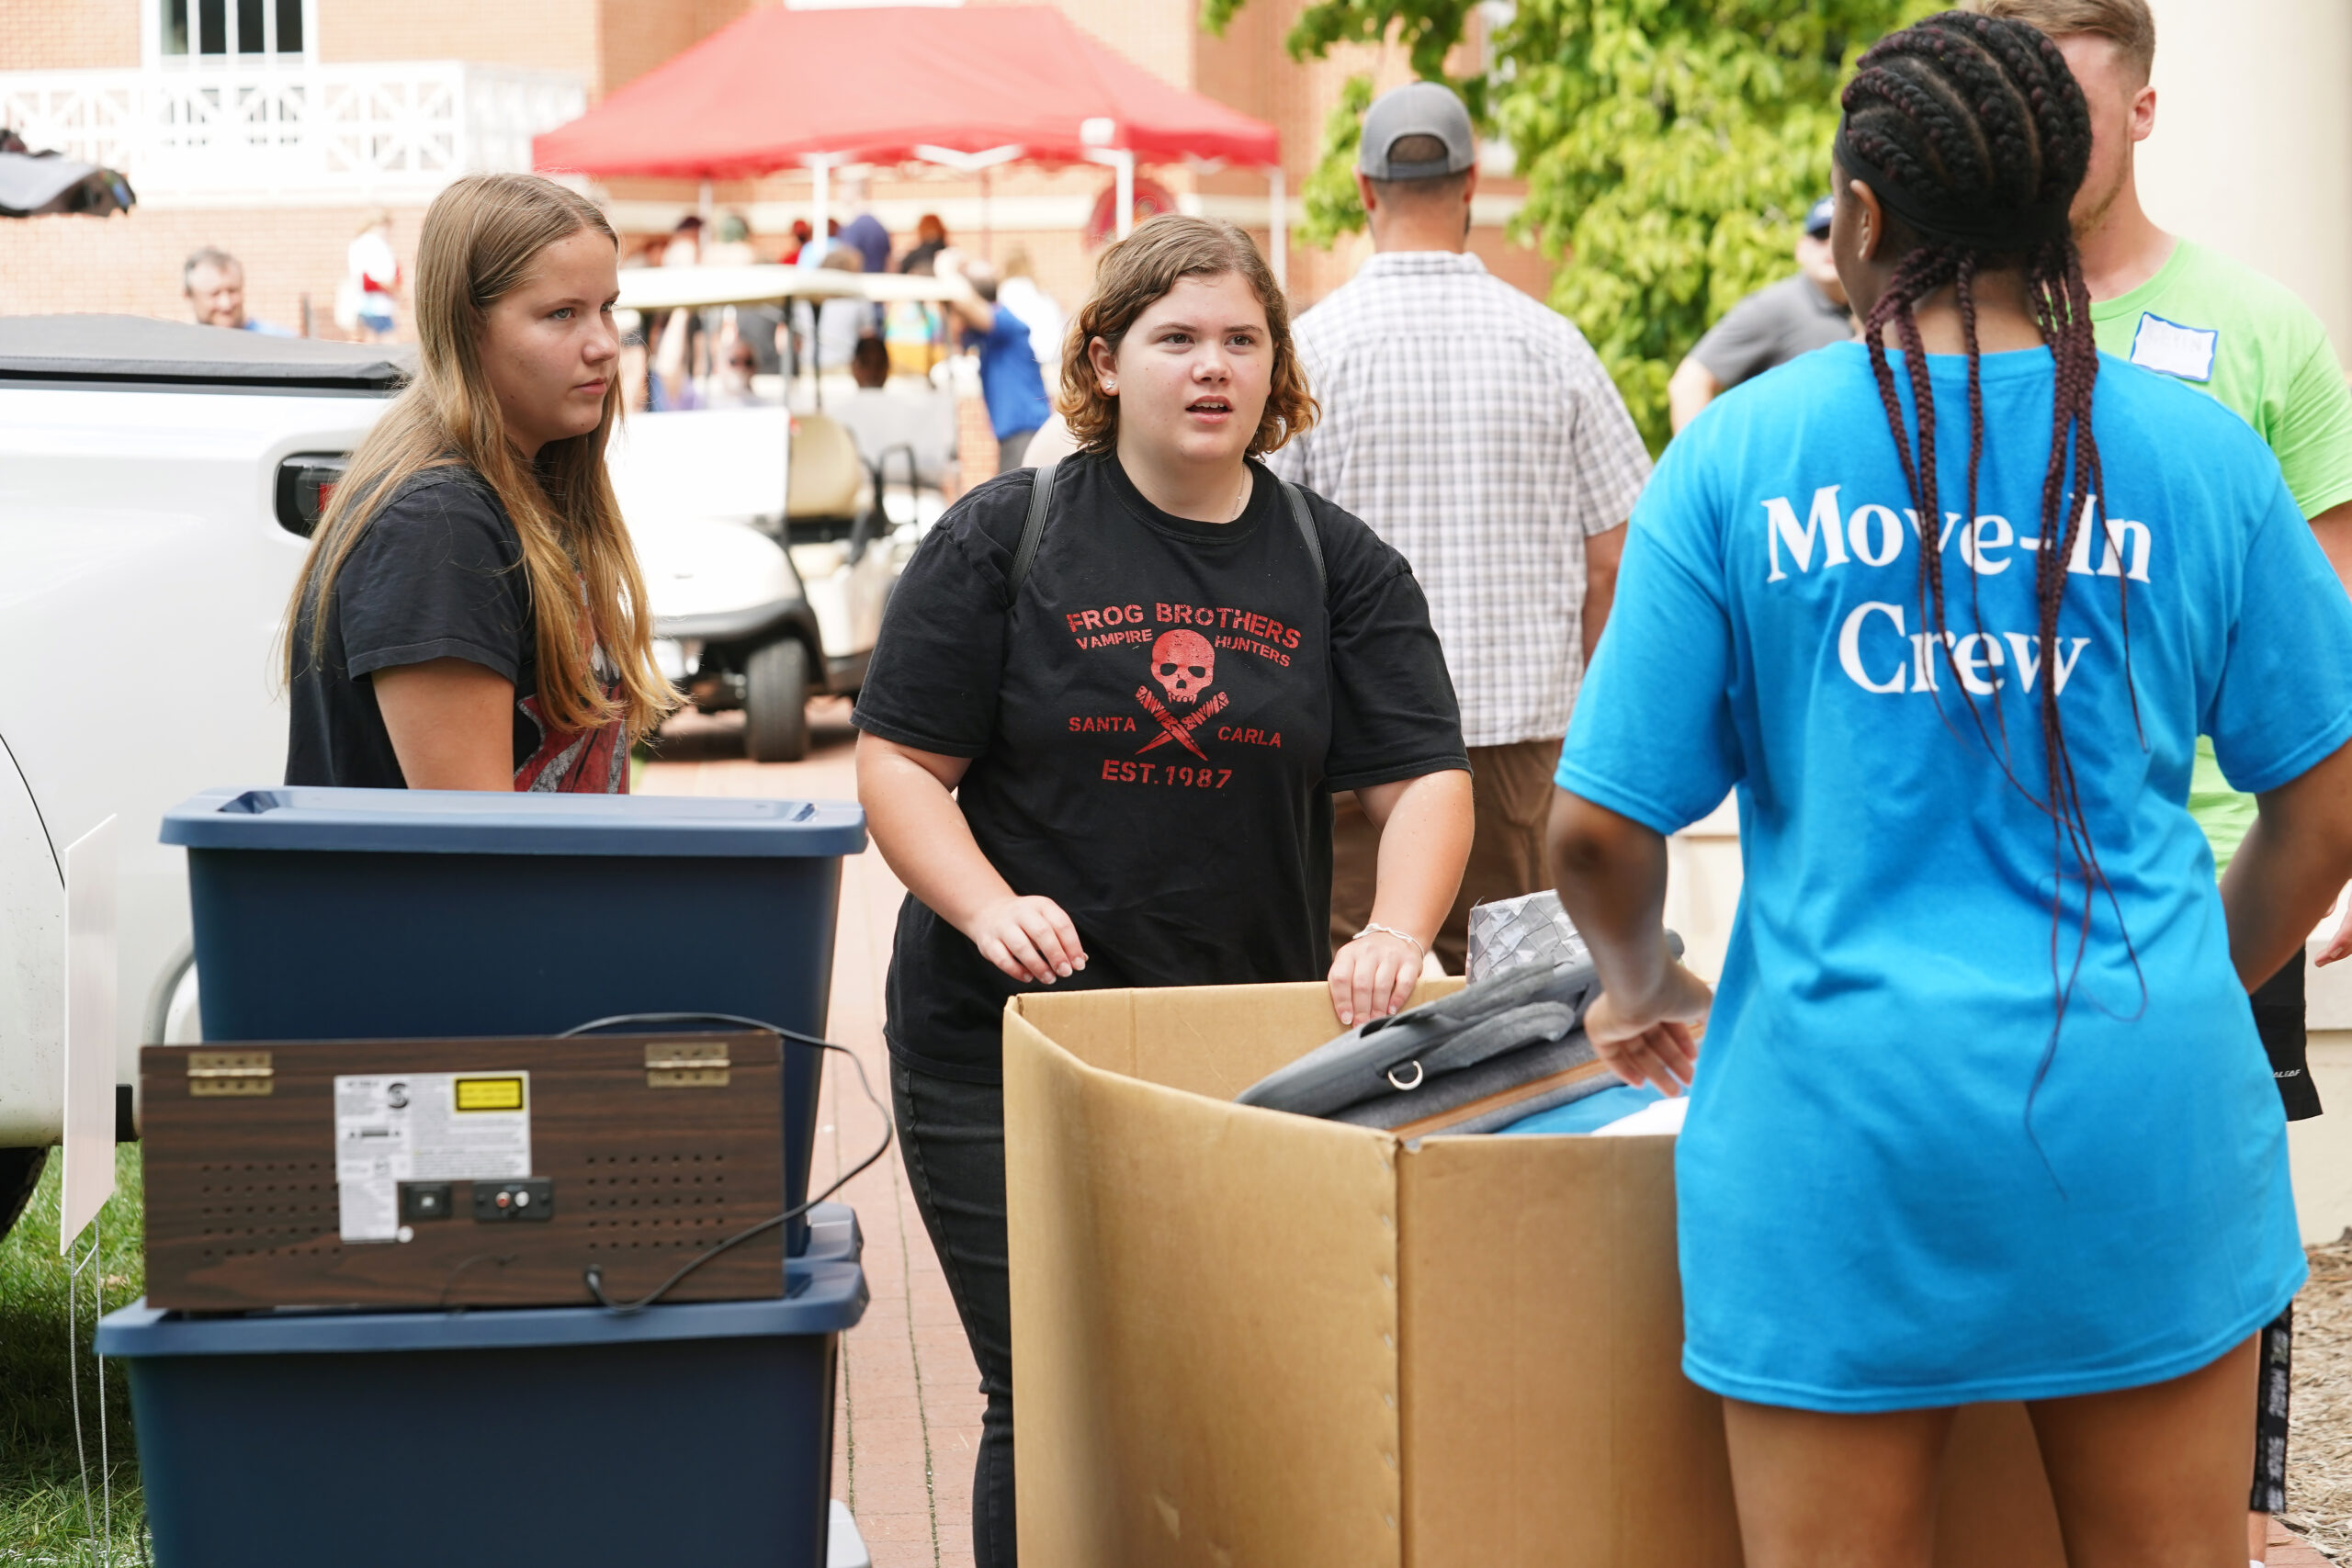 Help New Students as they Move In! EagleEye